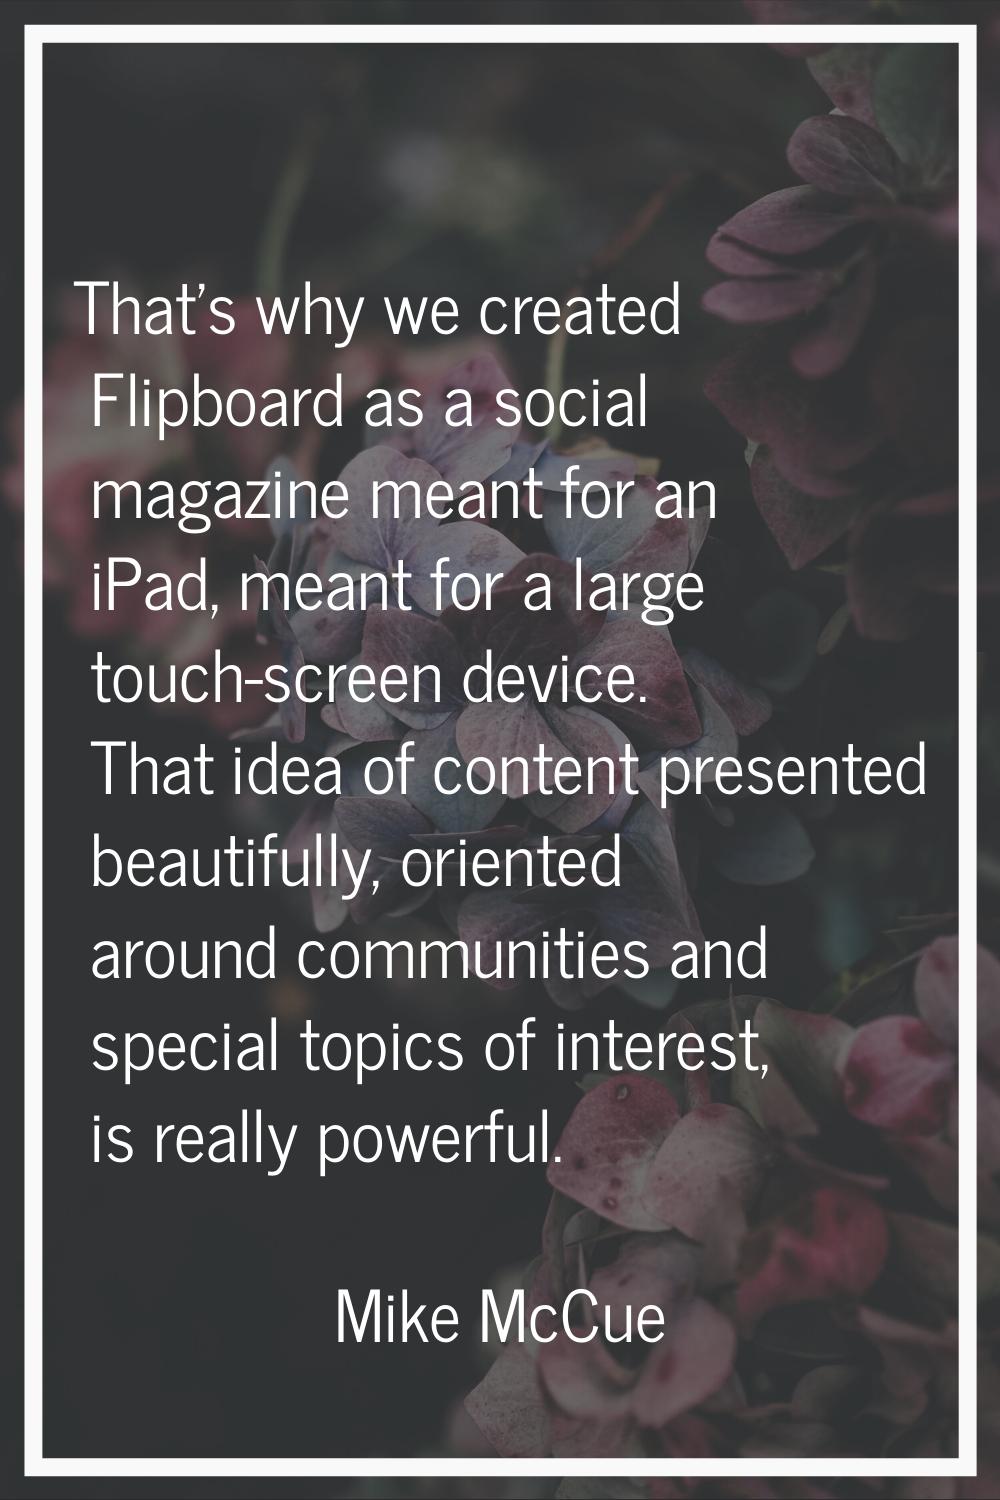 That's why we created Flipboard as a social magazine meant for an iPad, meant for a large touch-scr